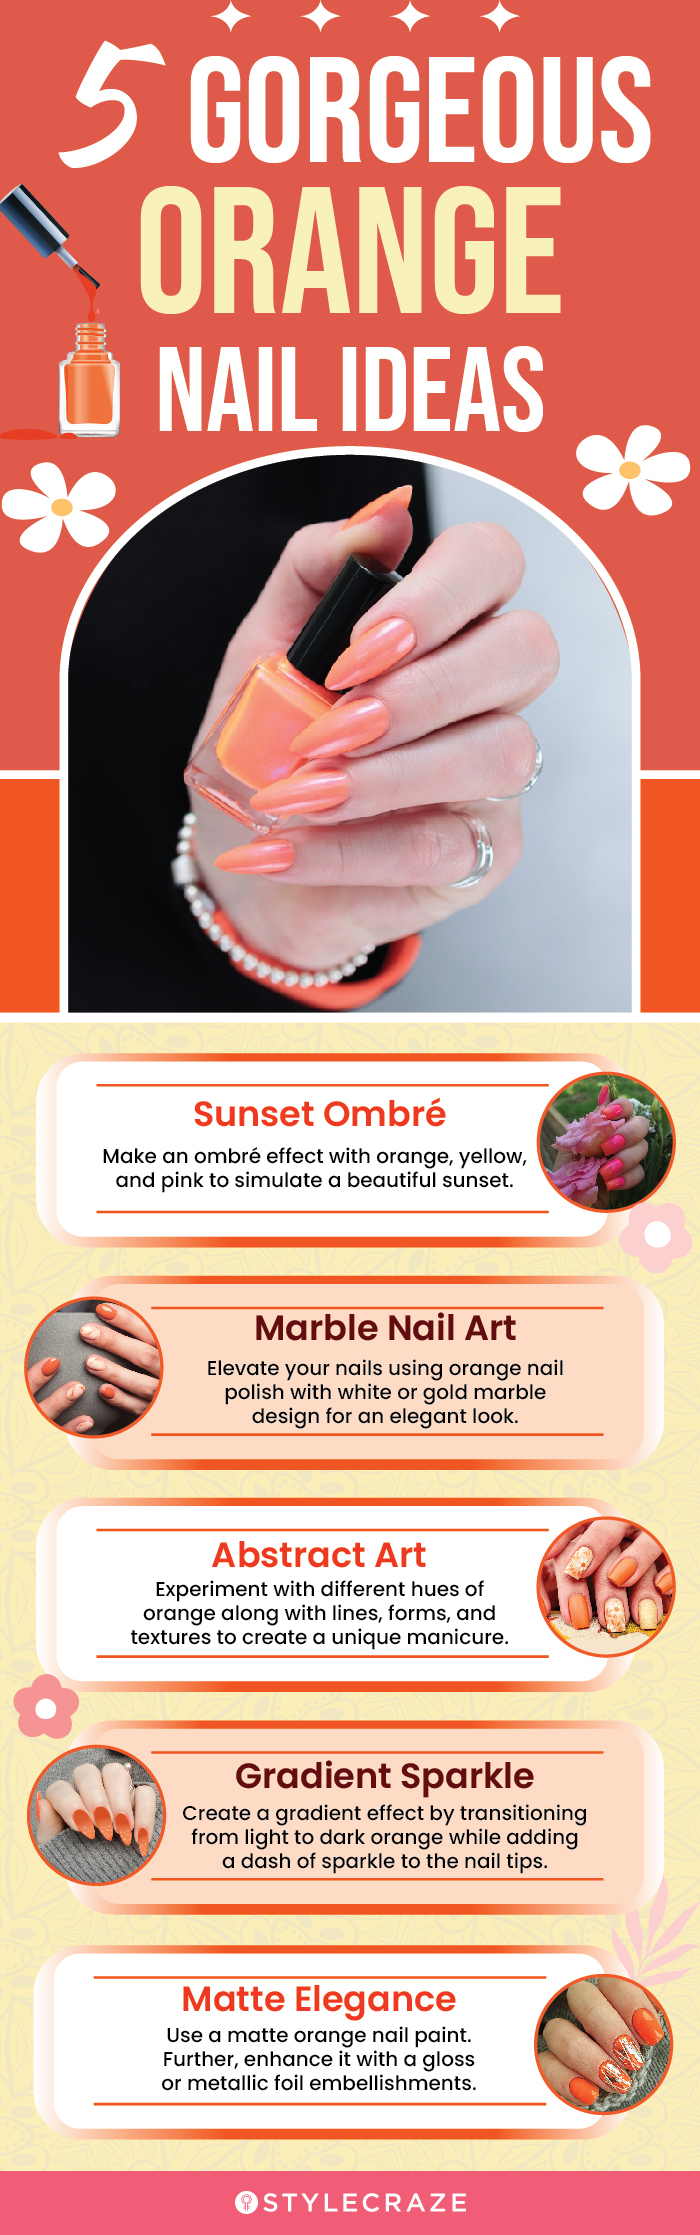 Burnt Orange Nails Are Having A Moment – Here's How To Get Them